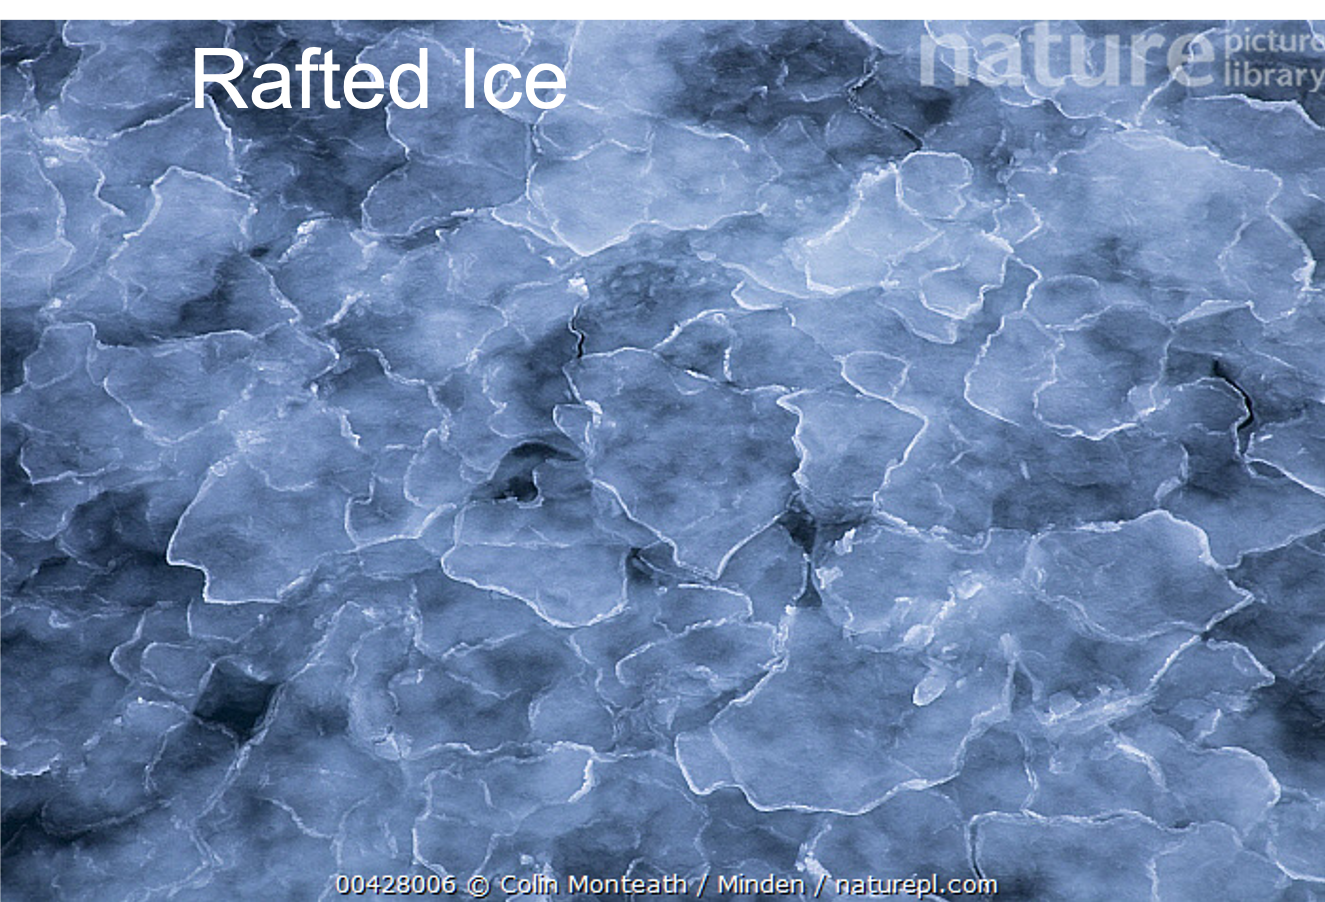 Rafted ice